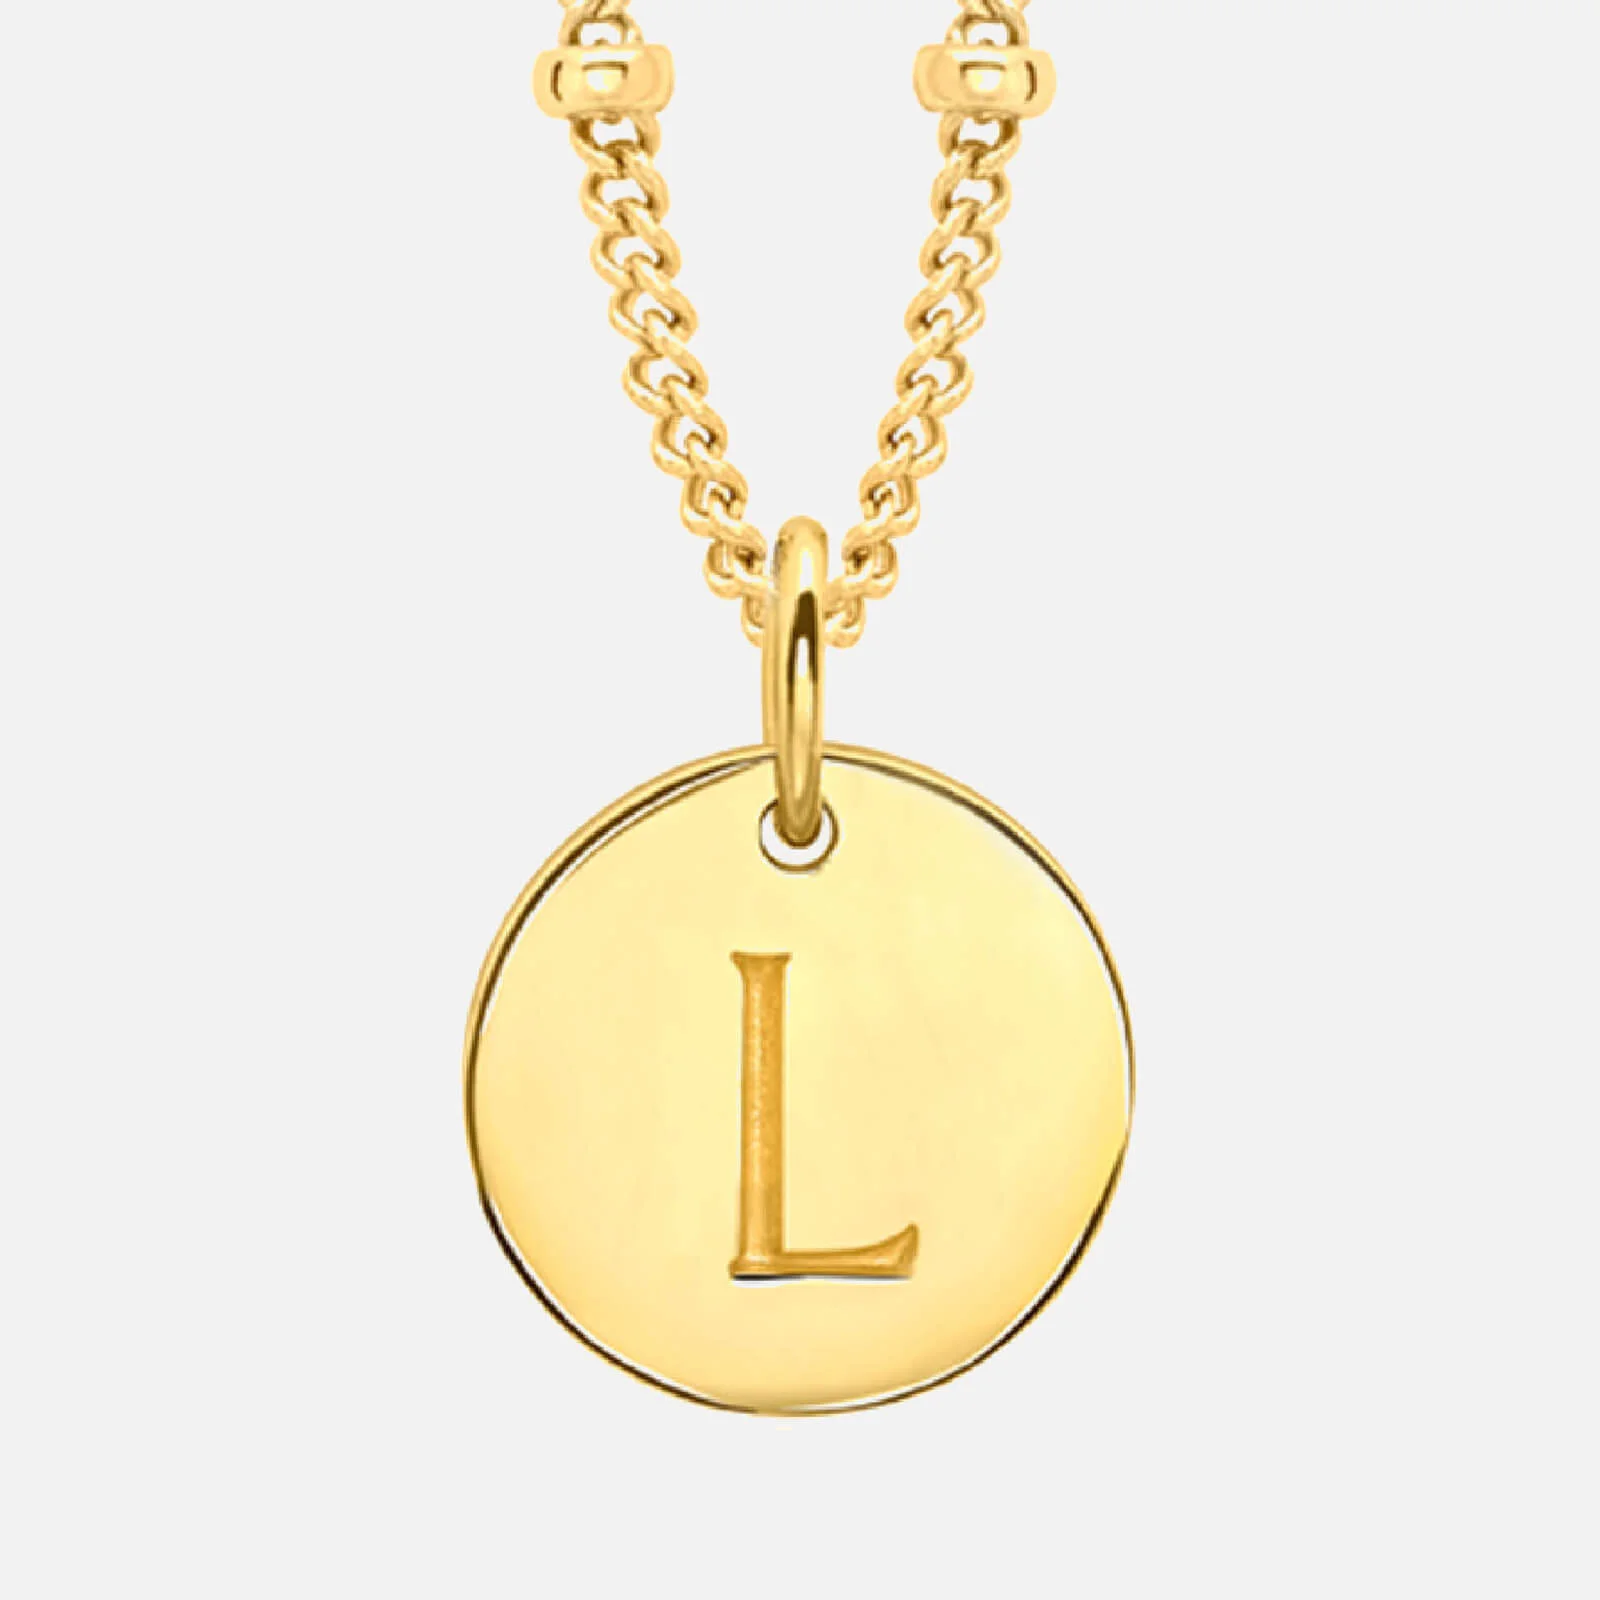 Missoma Women's Initial Charm Necklace - L - Gold Image 1